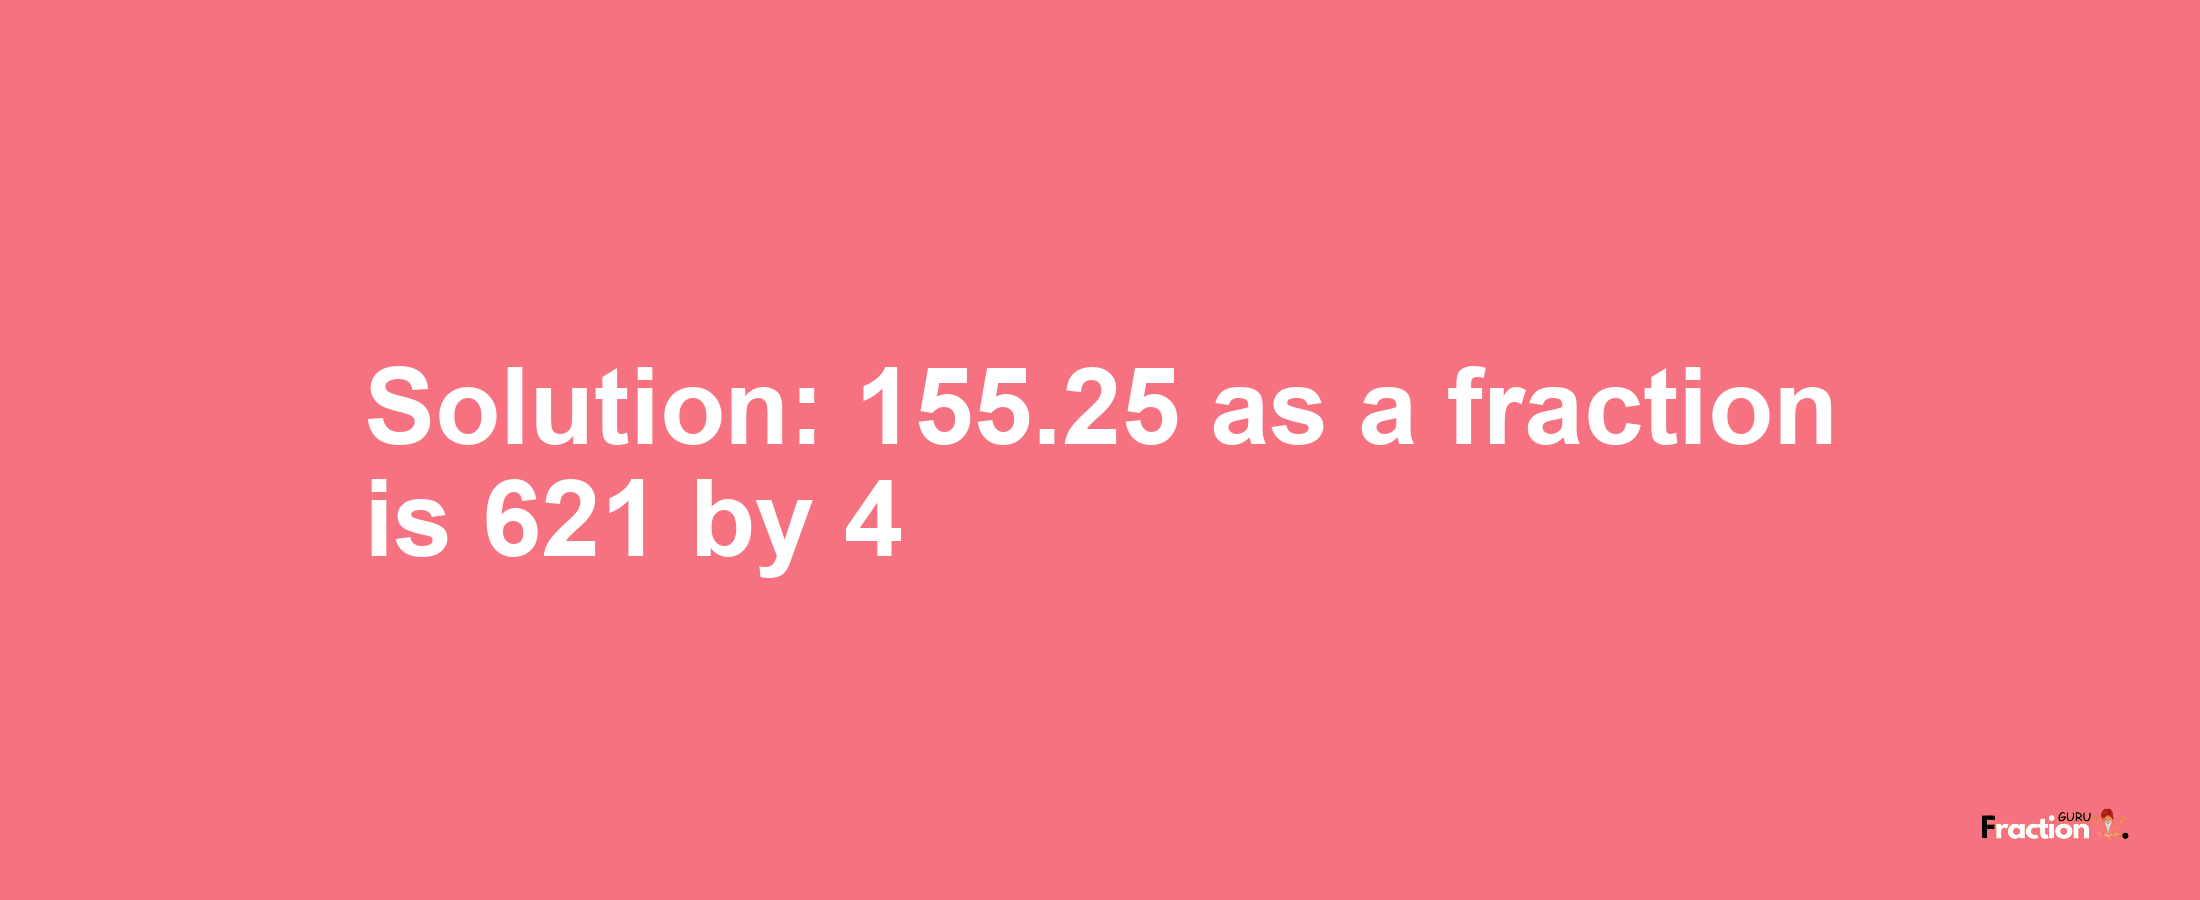 Solution:155.25 as a fraction is 621/4